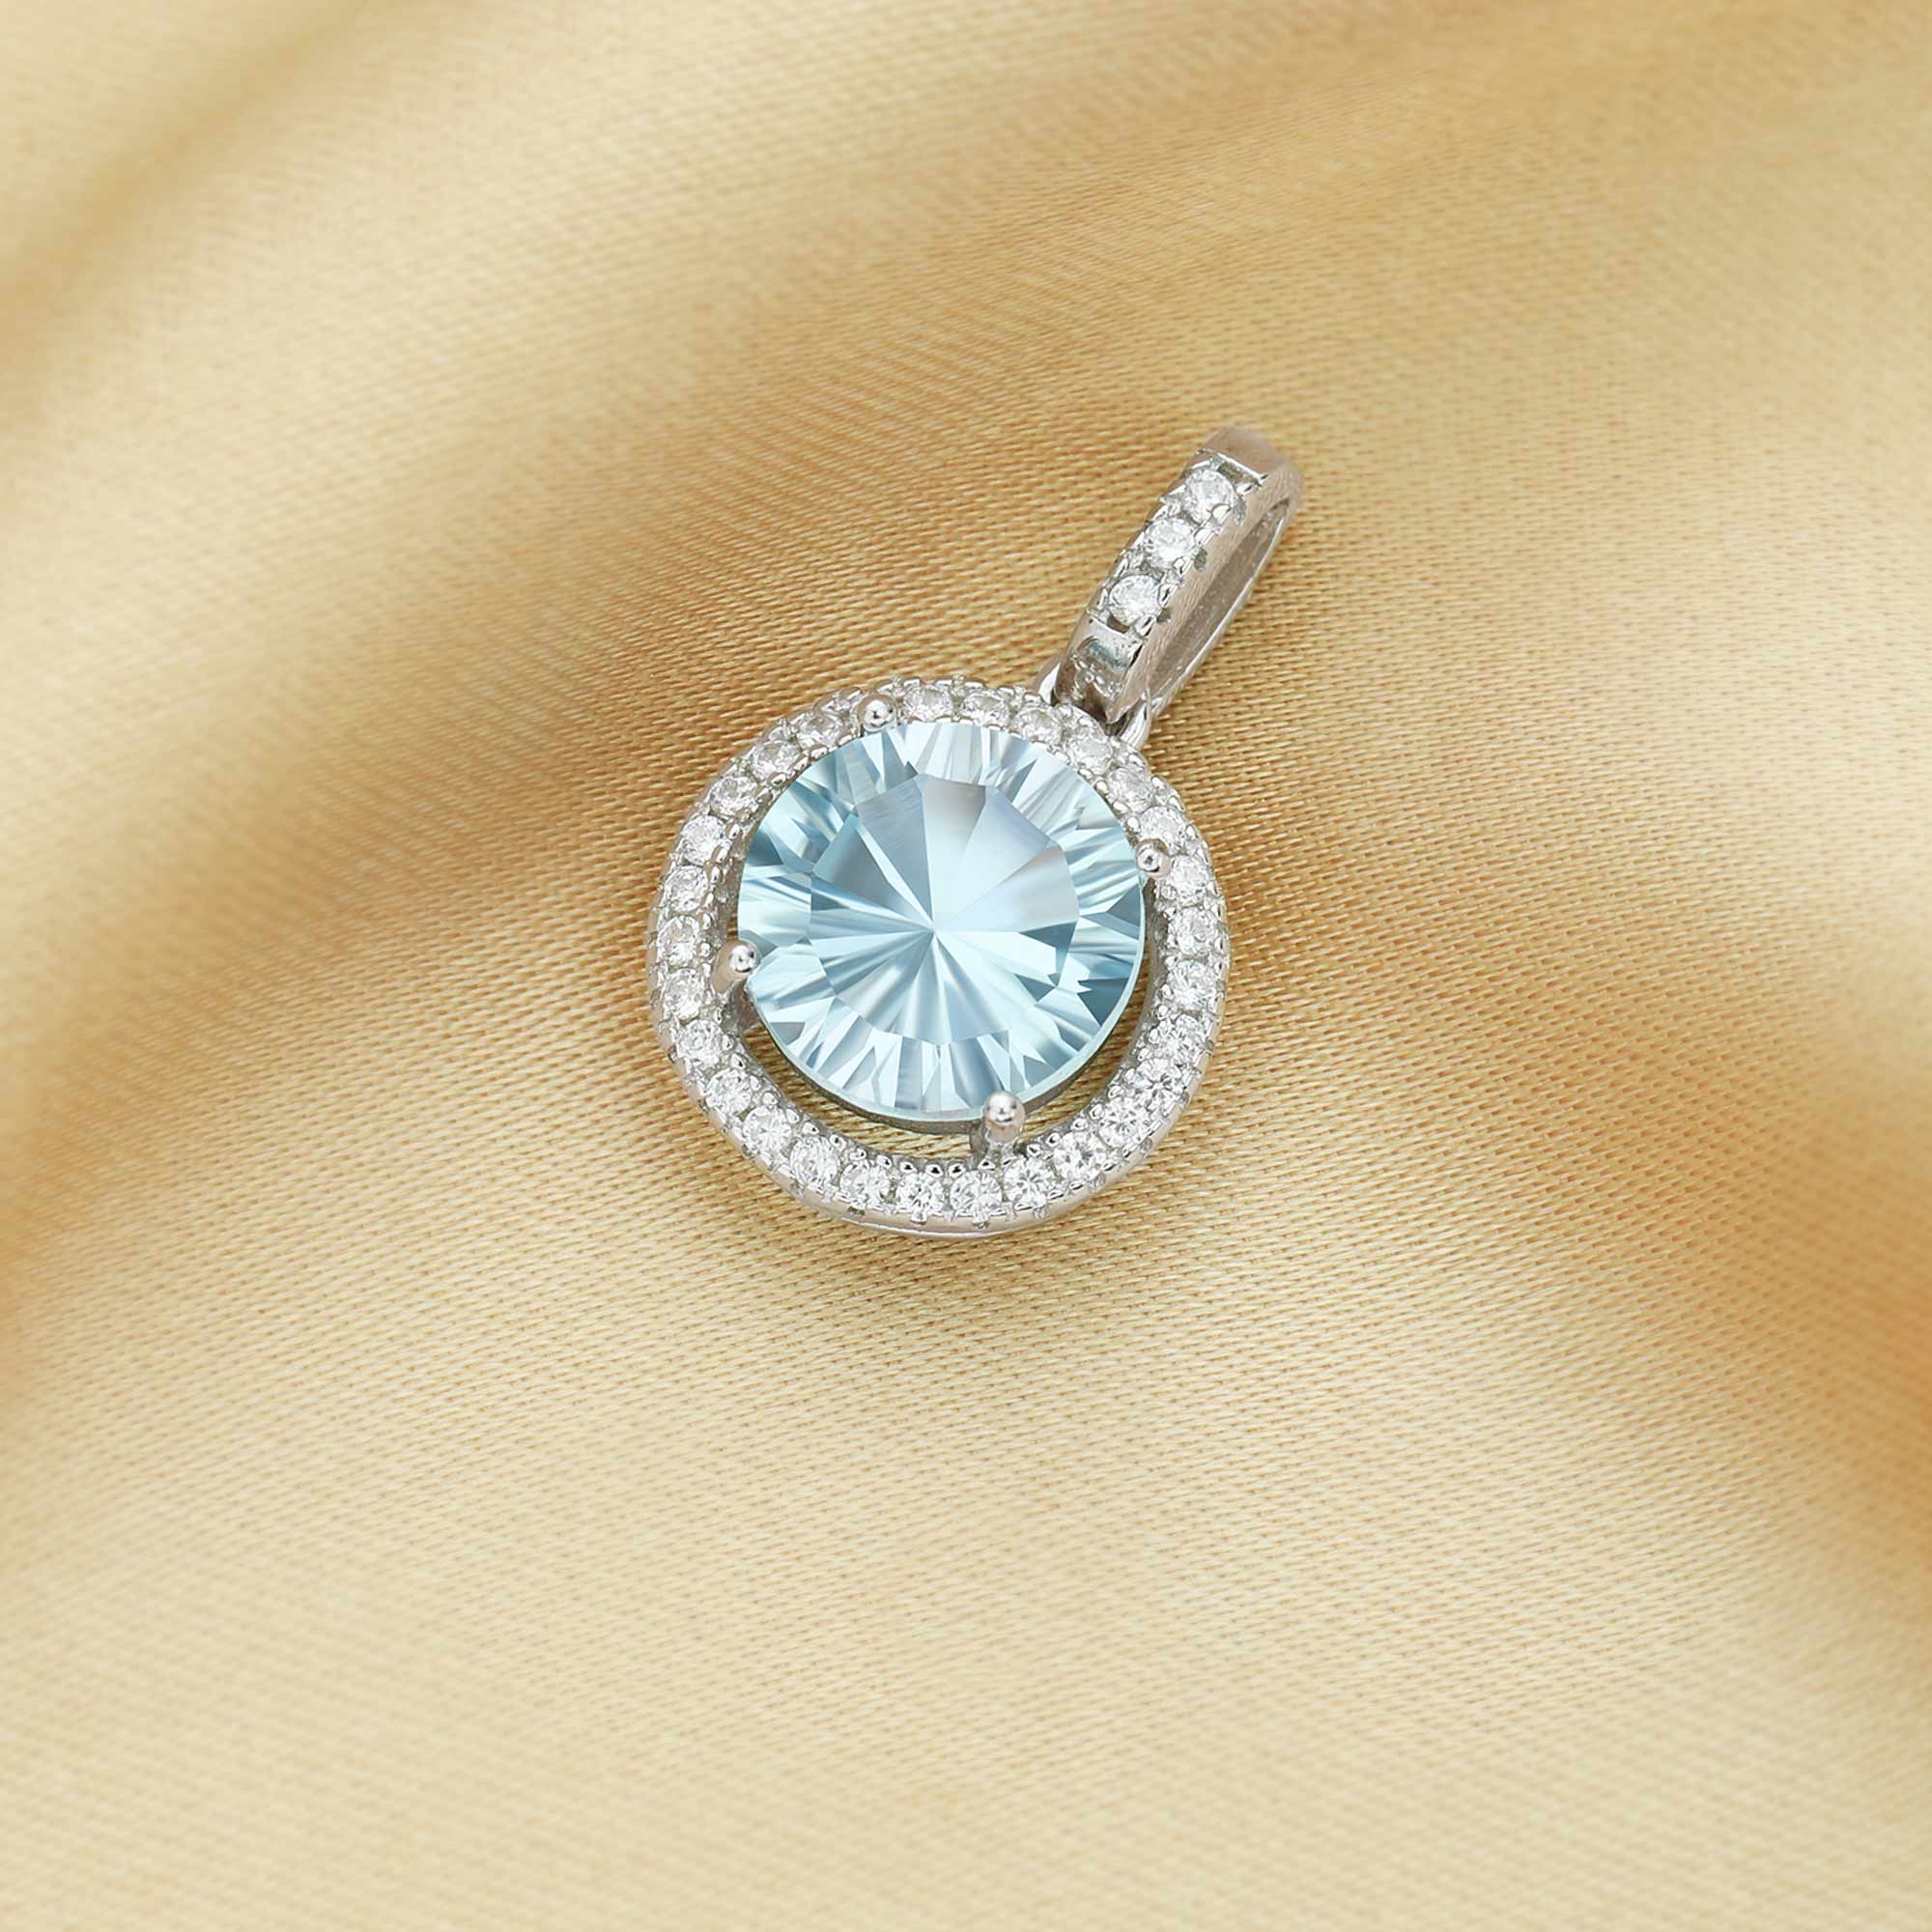 12MM Round Birthstone Pendant Charm With 8MM Faceted Sky Blue Topaz,Solid 925 Sterling Silver Charm,November Birthstone Pendant 1411321 - Click Image to Close